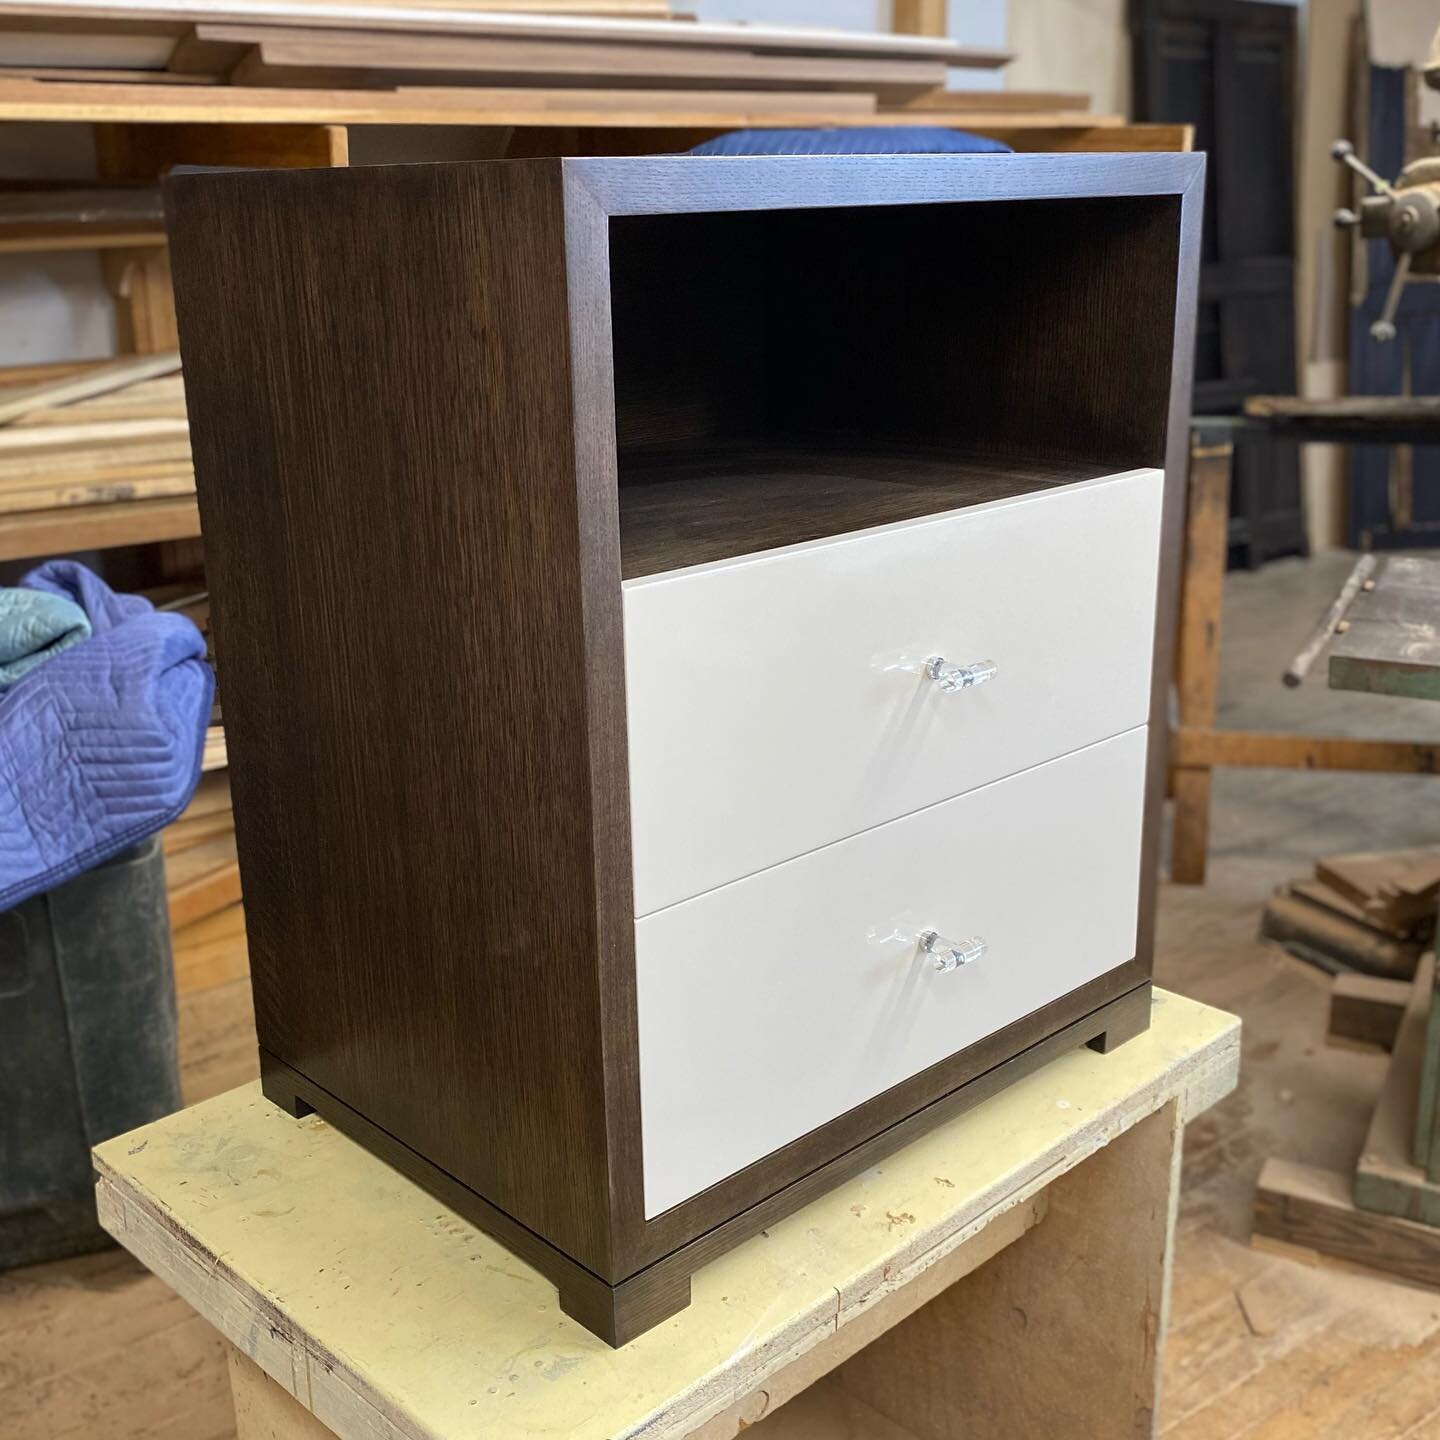 Small finishing project: two white oak nightstands, espresso brown stain, high gloss off-white drawer fronts, crystal knobs (Chris Keller Woodworking) ✨#dogtownrestoration #customfinishing #customfurniture #furnituredesign #oakfurniture #newengland